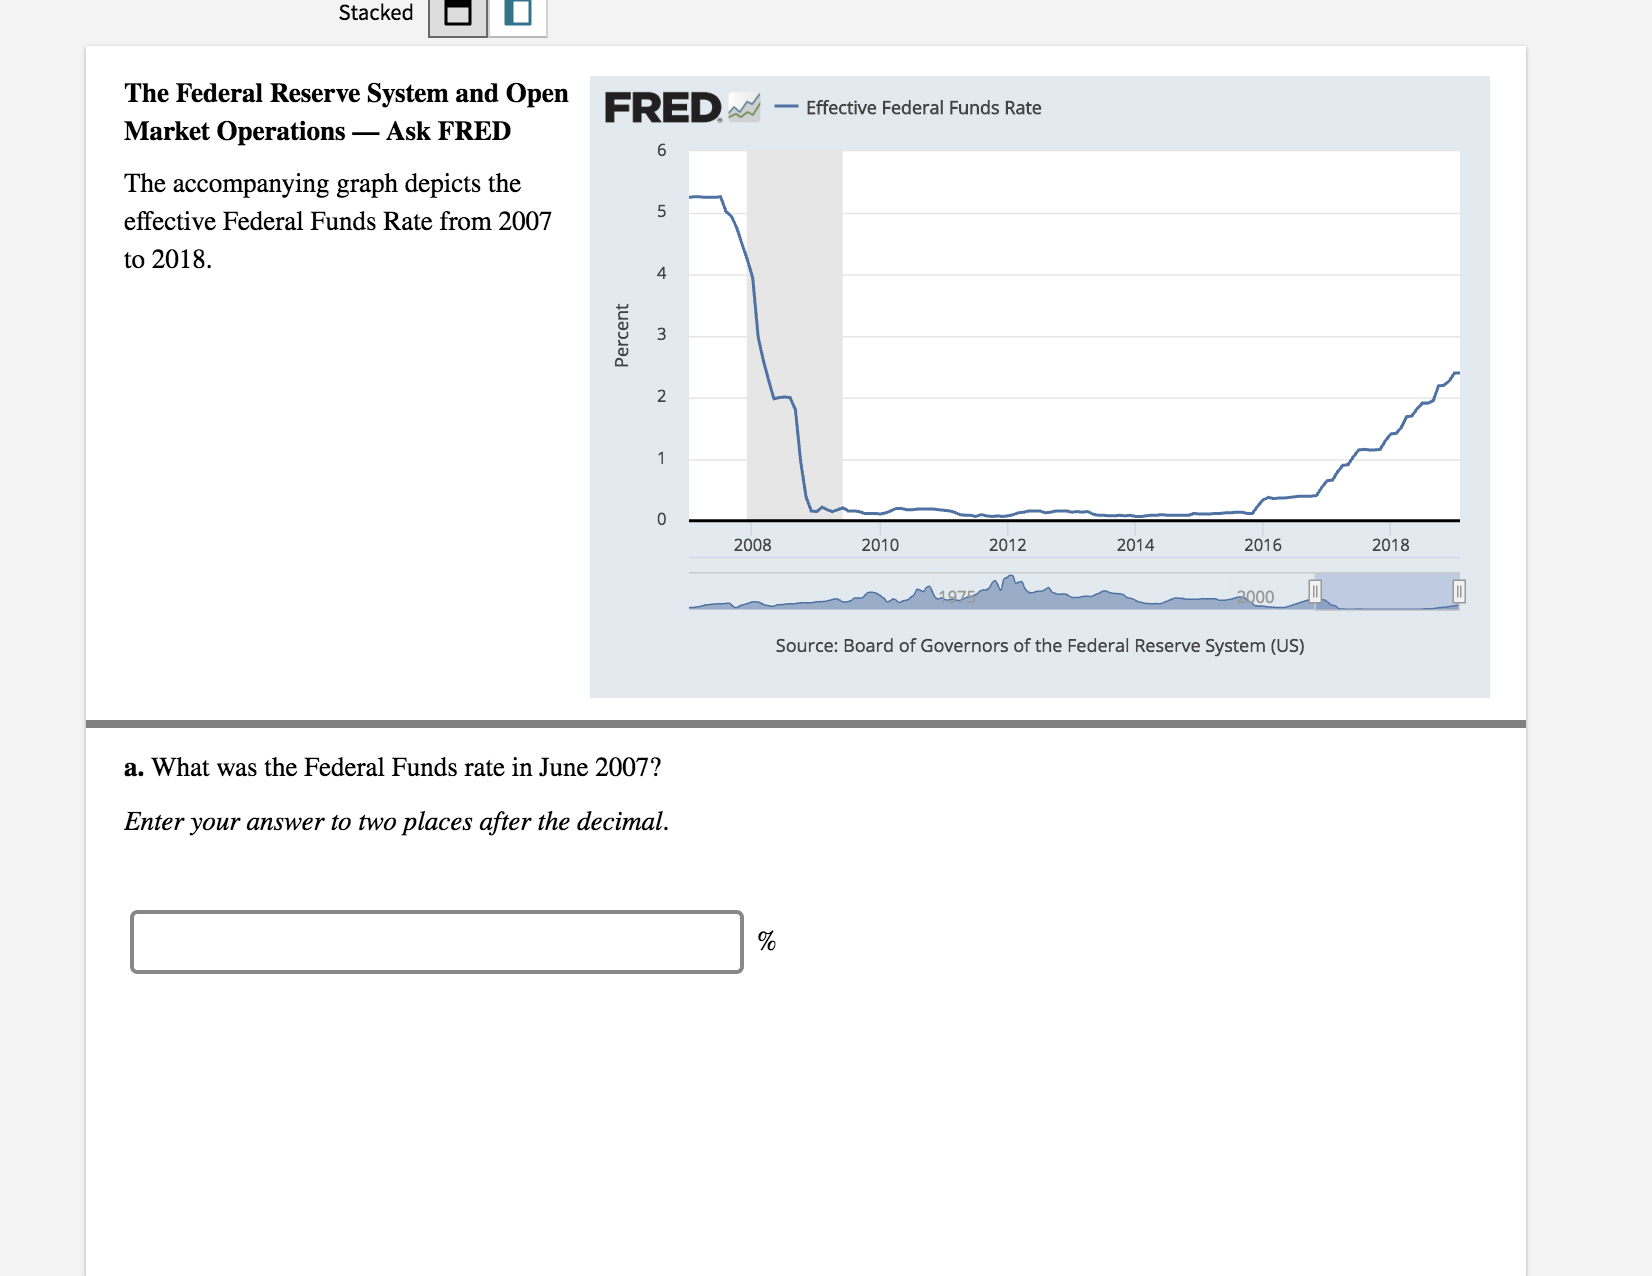 Stacked
The Federal Reserve System and Open
Market Operations_ Ask FRED
The accompanying graph depicts the
effective Federal Funds Rate from 2007
to 2018.
FRED-Effective Federal Funds Rate
4
2
2008
2010
2012
2014
2016
2018
Source: Board of Governors of the Federal Reserve System (US)
a. What was the Federal Funds rate in June 2007?
Enter your answer to two places after the decimal.
